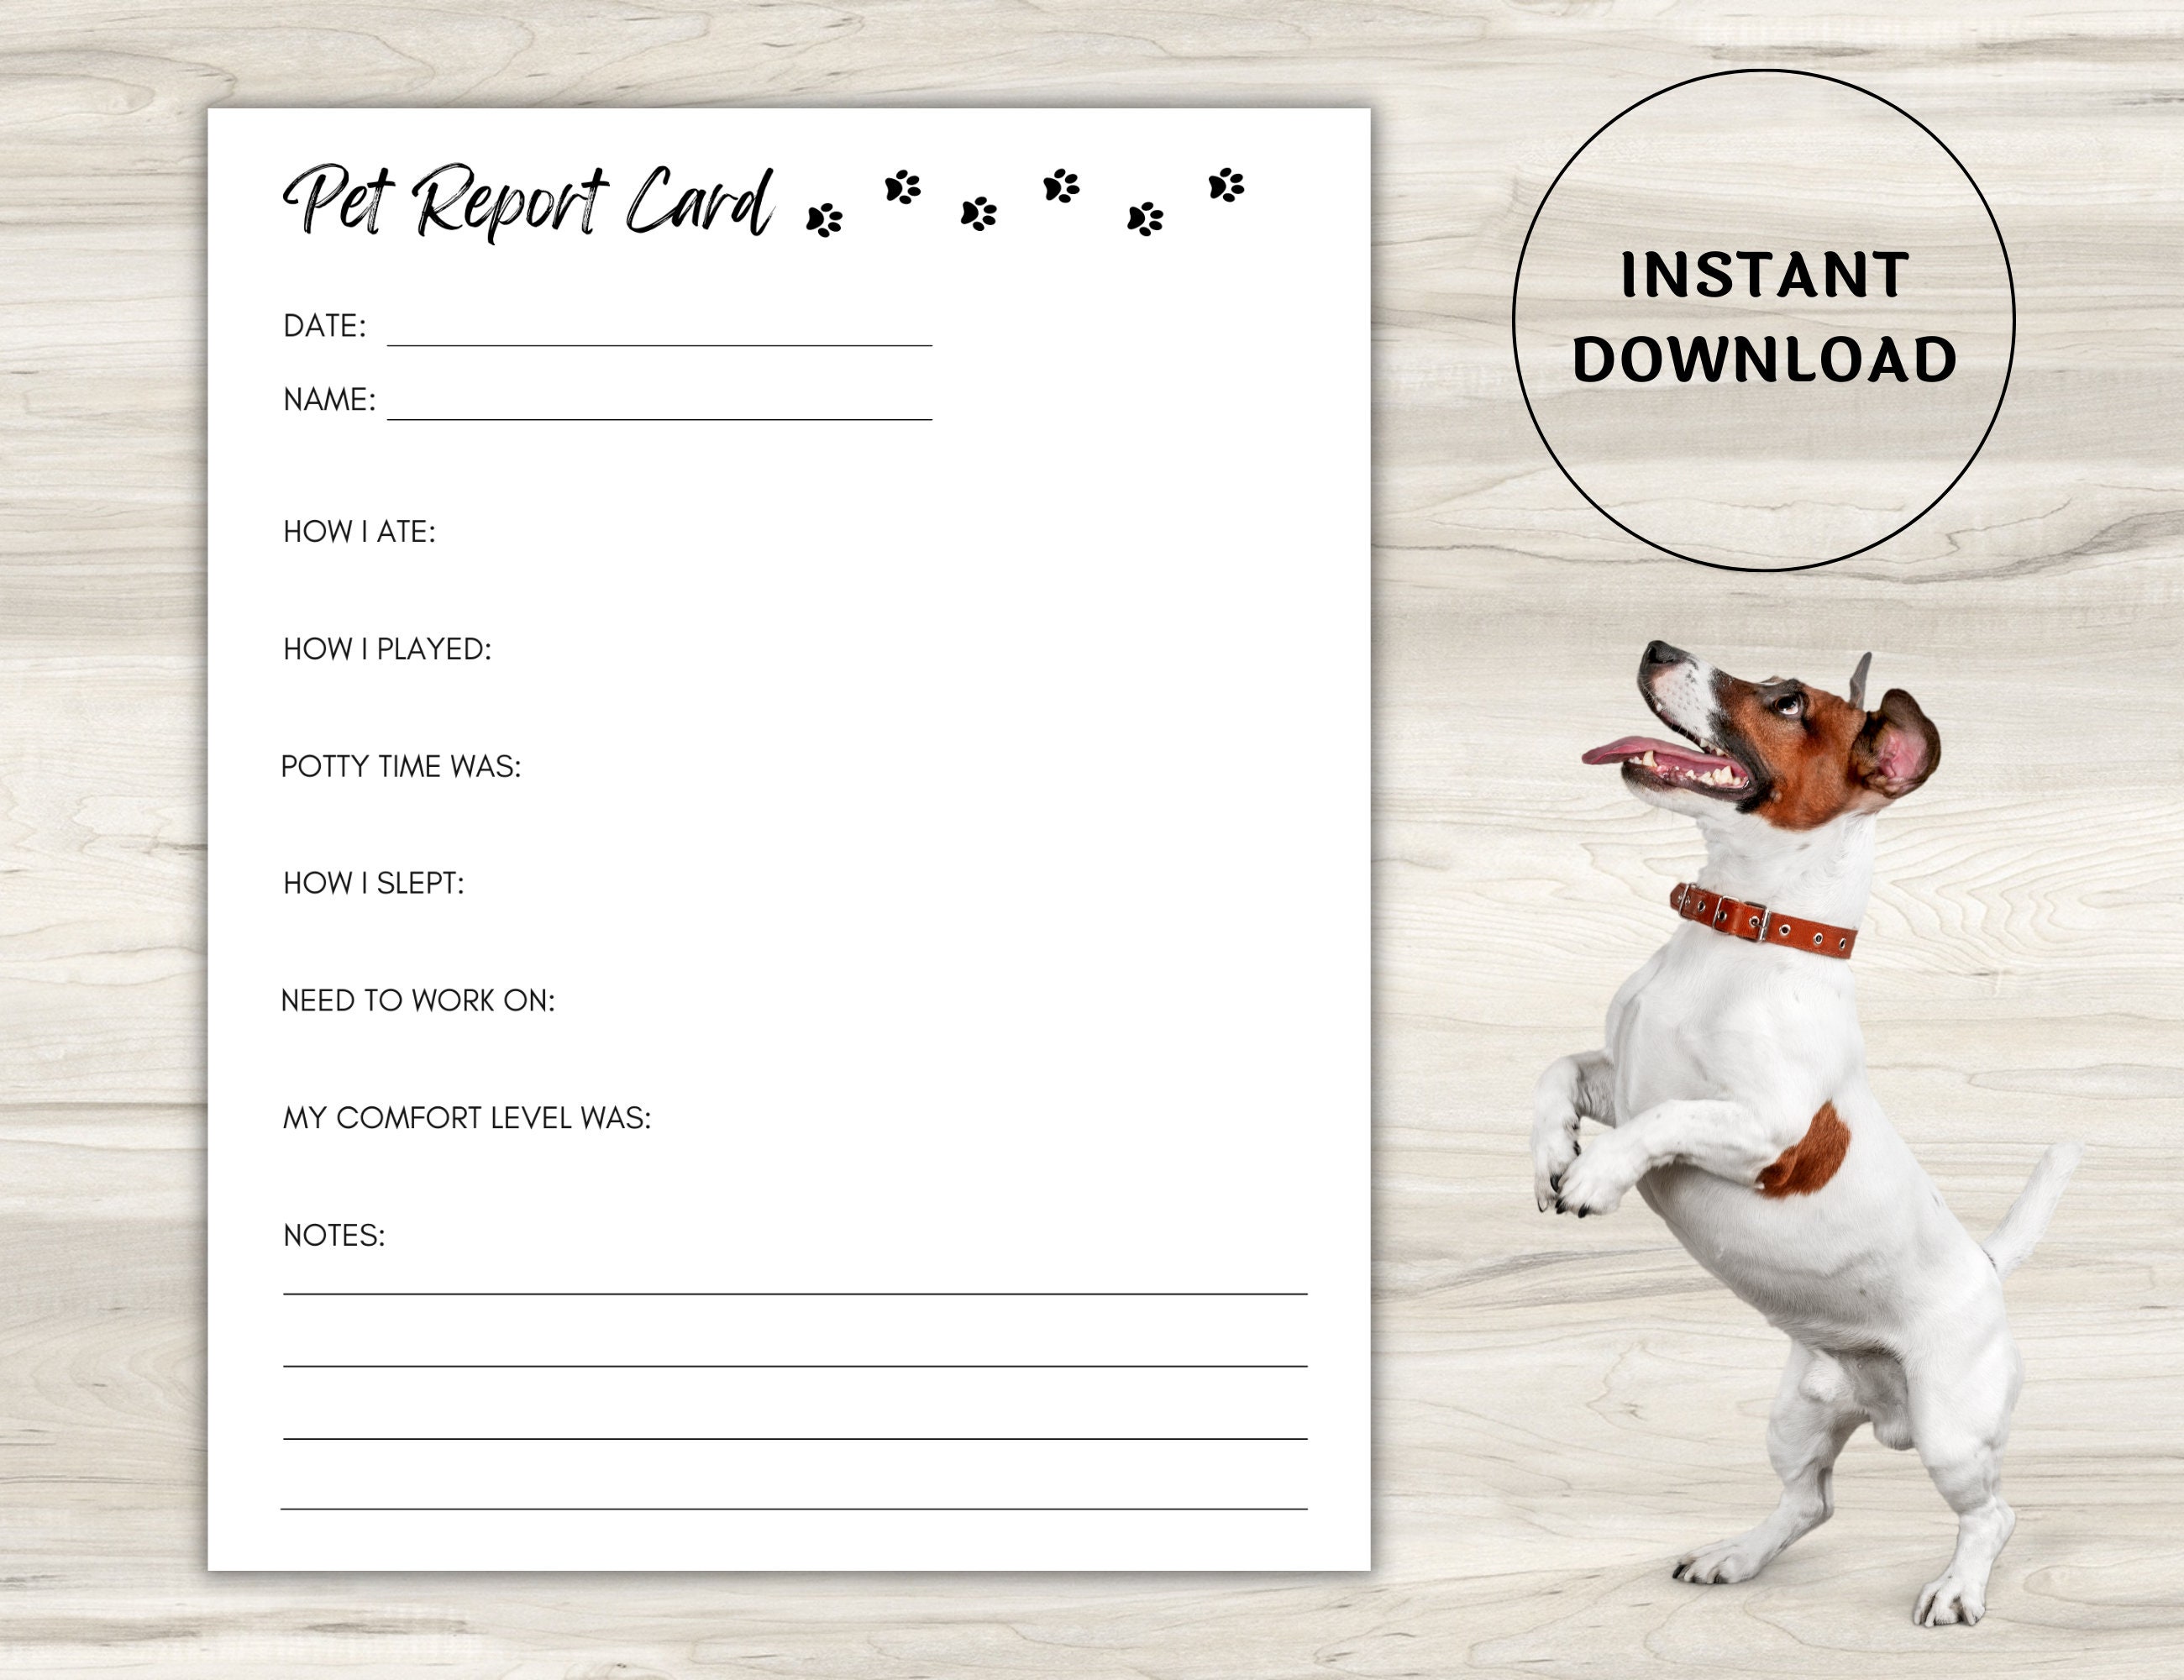 pet-report-card-printable-for-pet-sitter-business-dog-report-etsy